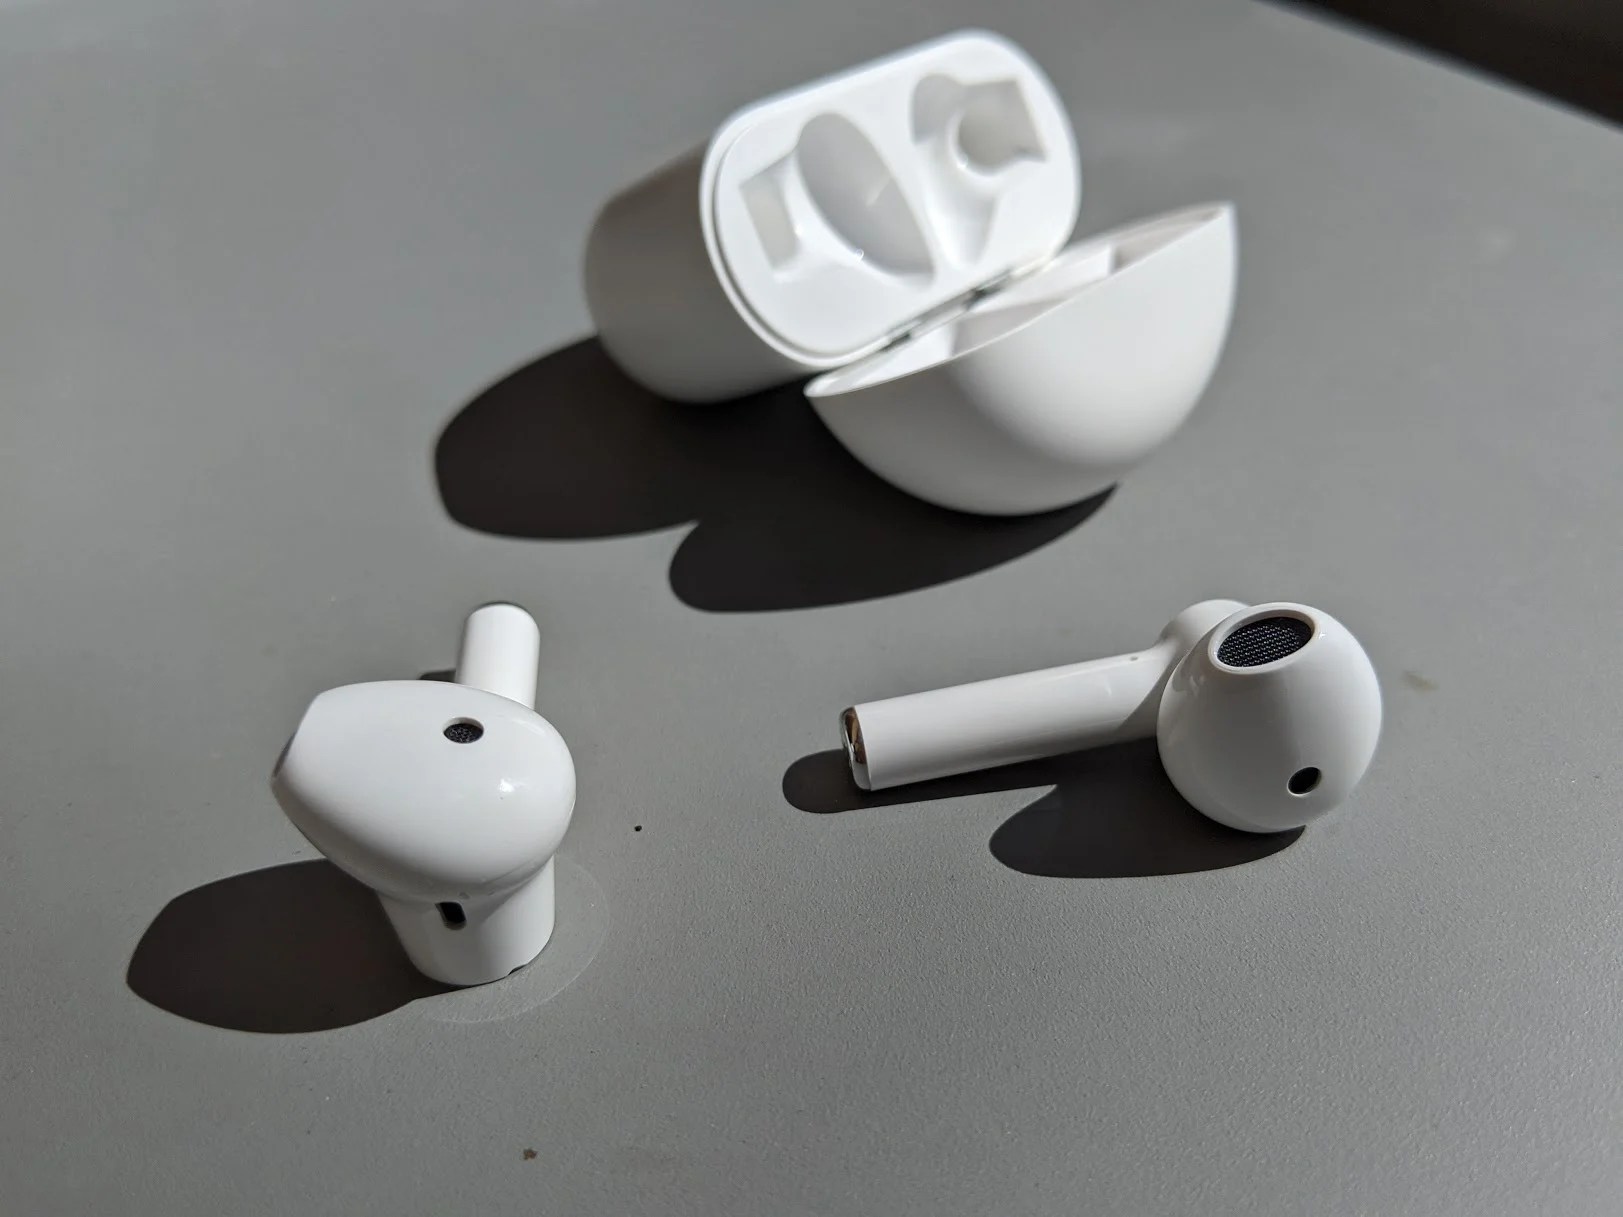 Les OnePlus Buds